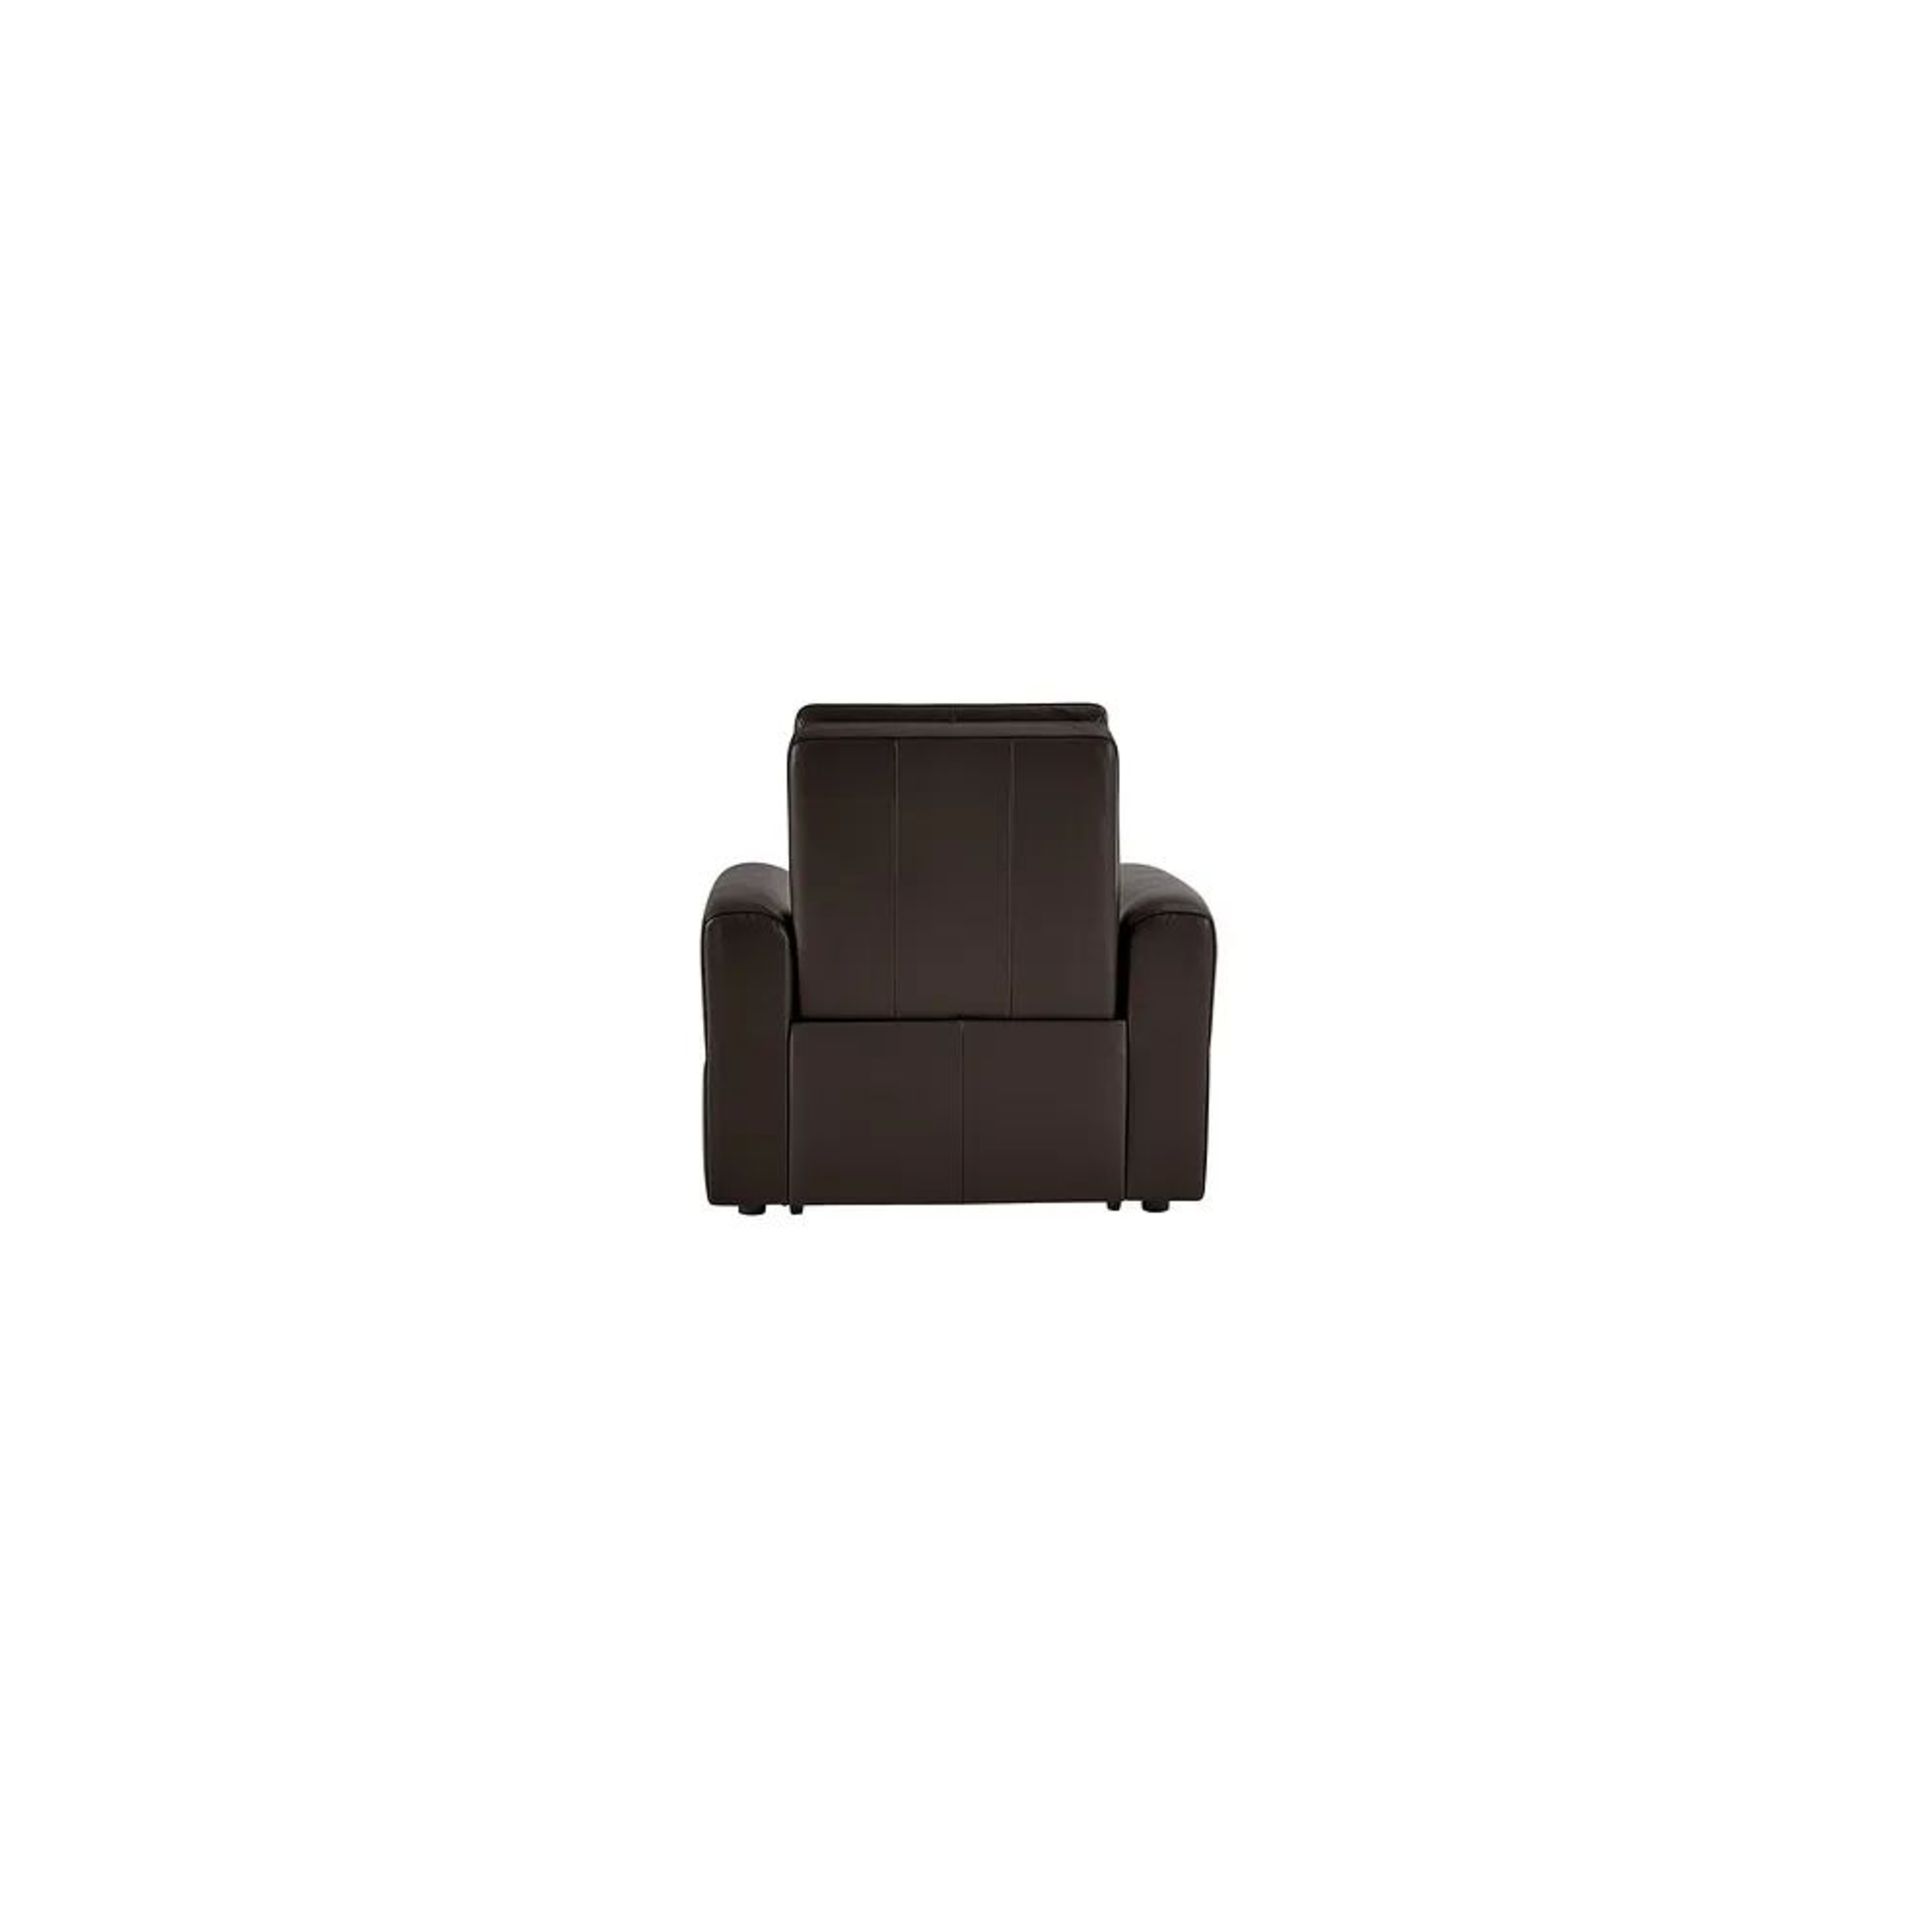 BRAND NEW SAMSON Electric Recliner Armchair - TWO TONE BROWN LEATHER. RRP £1249. Showcasing neat, - Image 5 of 9